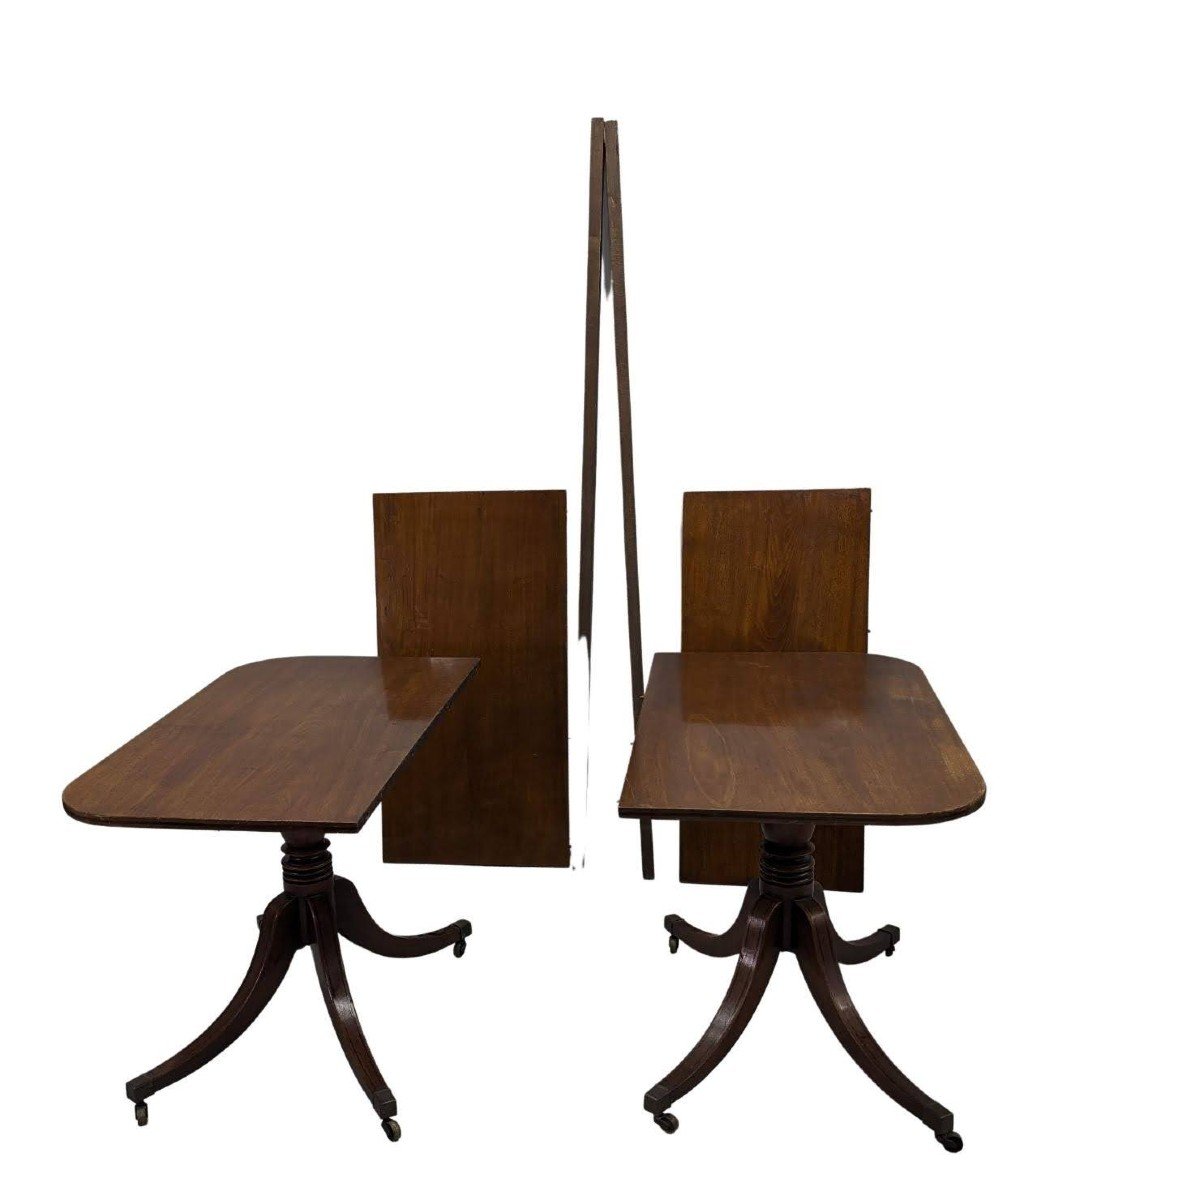 English Rectangle Table In Mahogany With Extensions That Can Make A Pair Of Consoles XIXth Century-photo-4